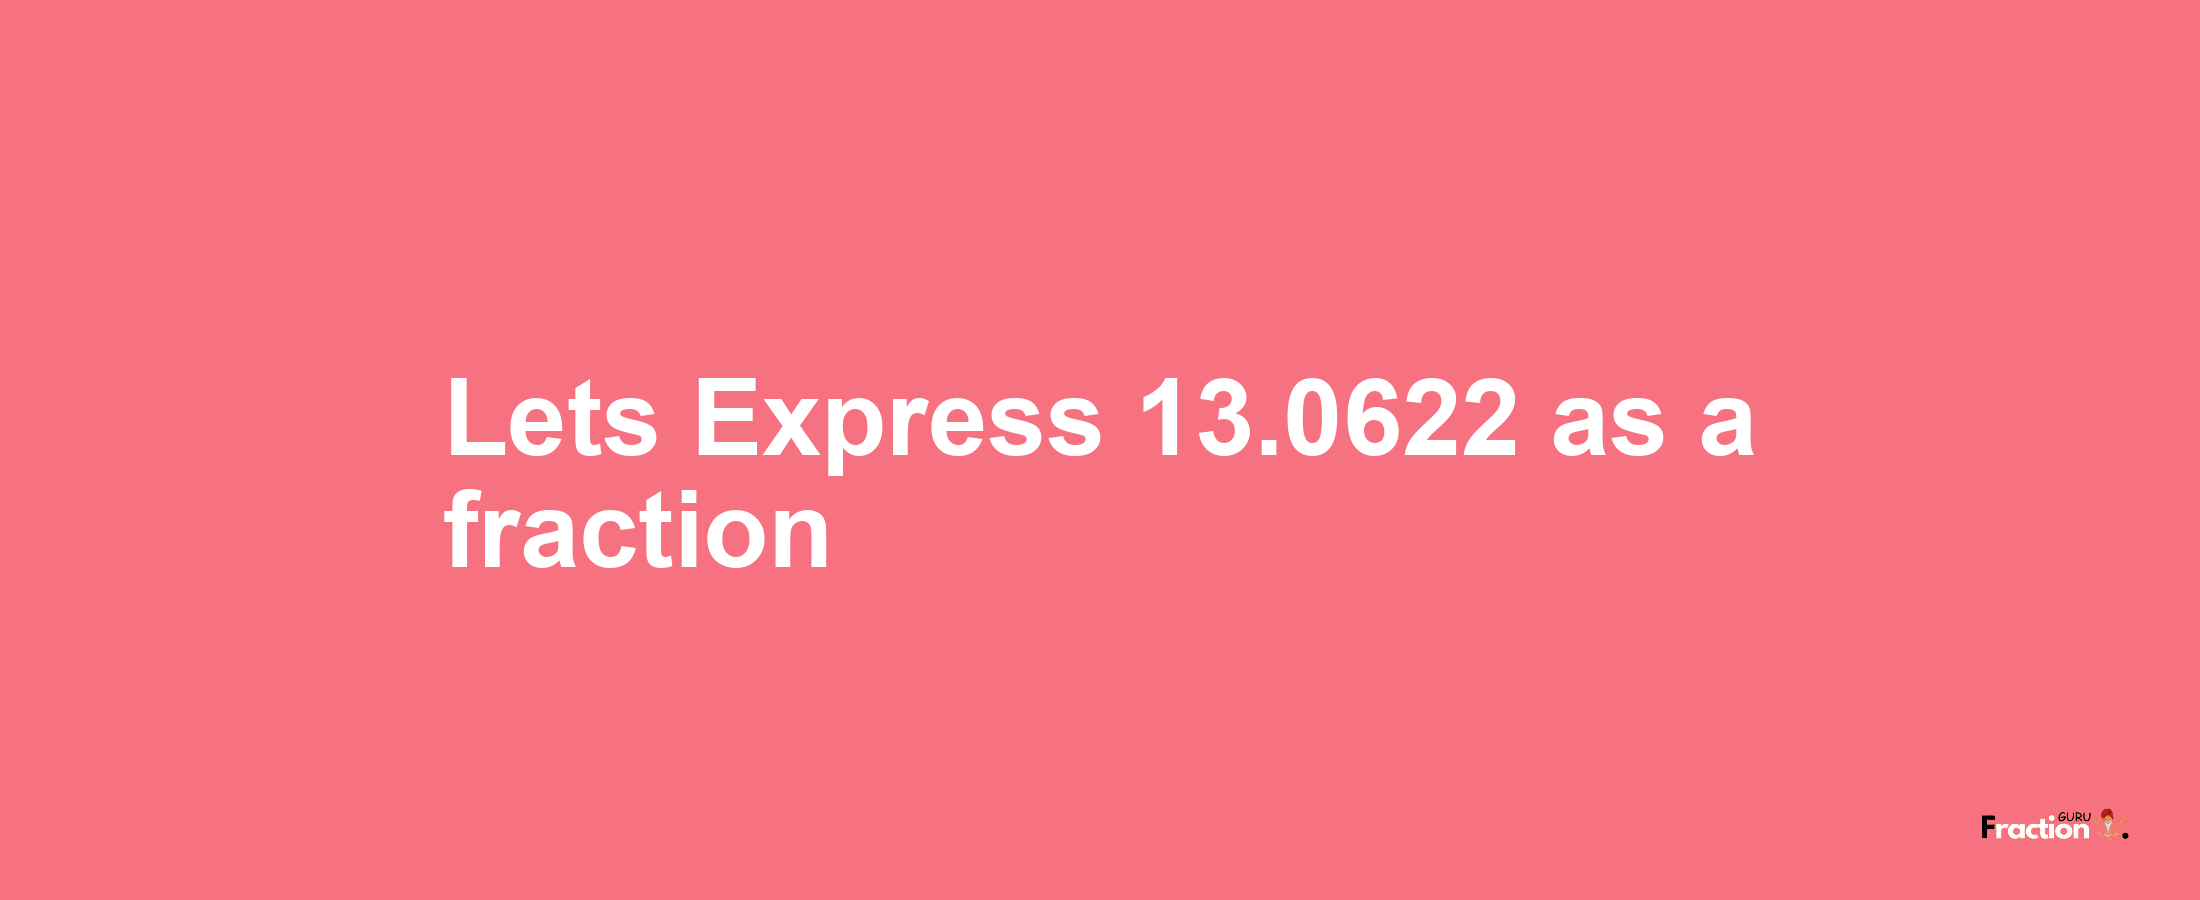 Lets Express 13.0622 as afraction